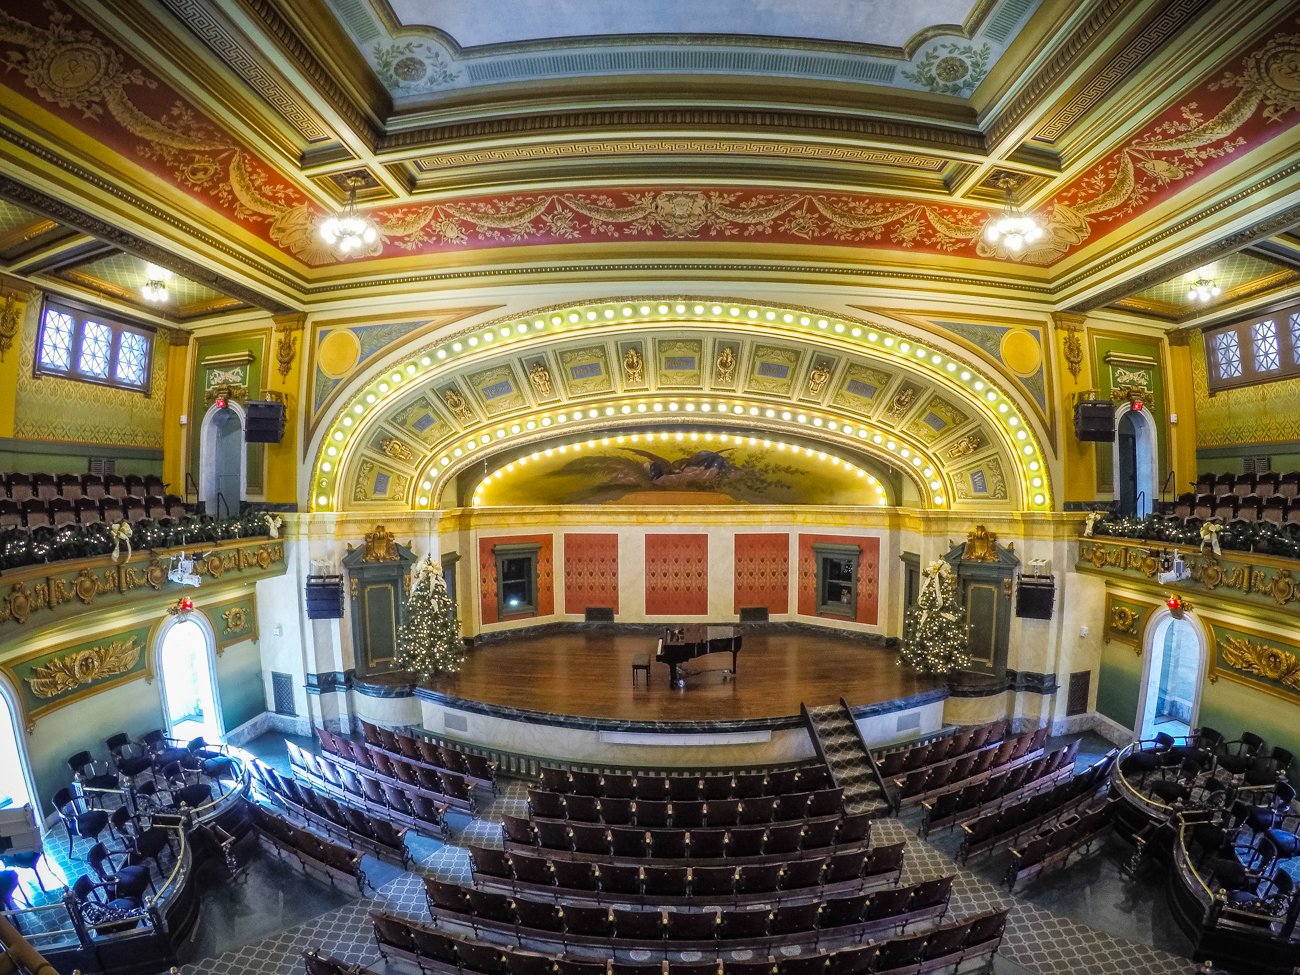 An 11 MillionDollar Renovation Turned Memorial Hall Into One Of The